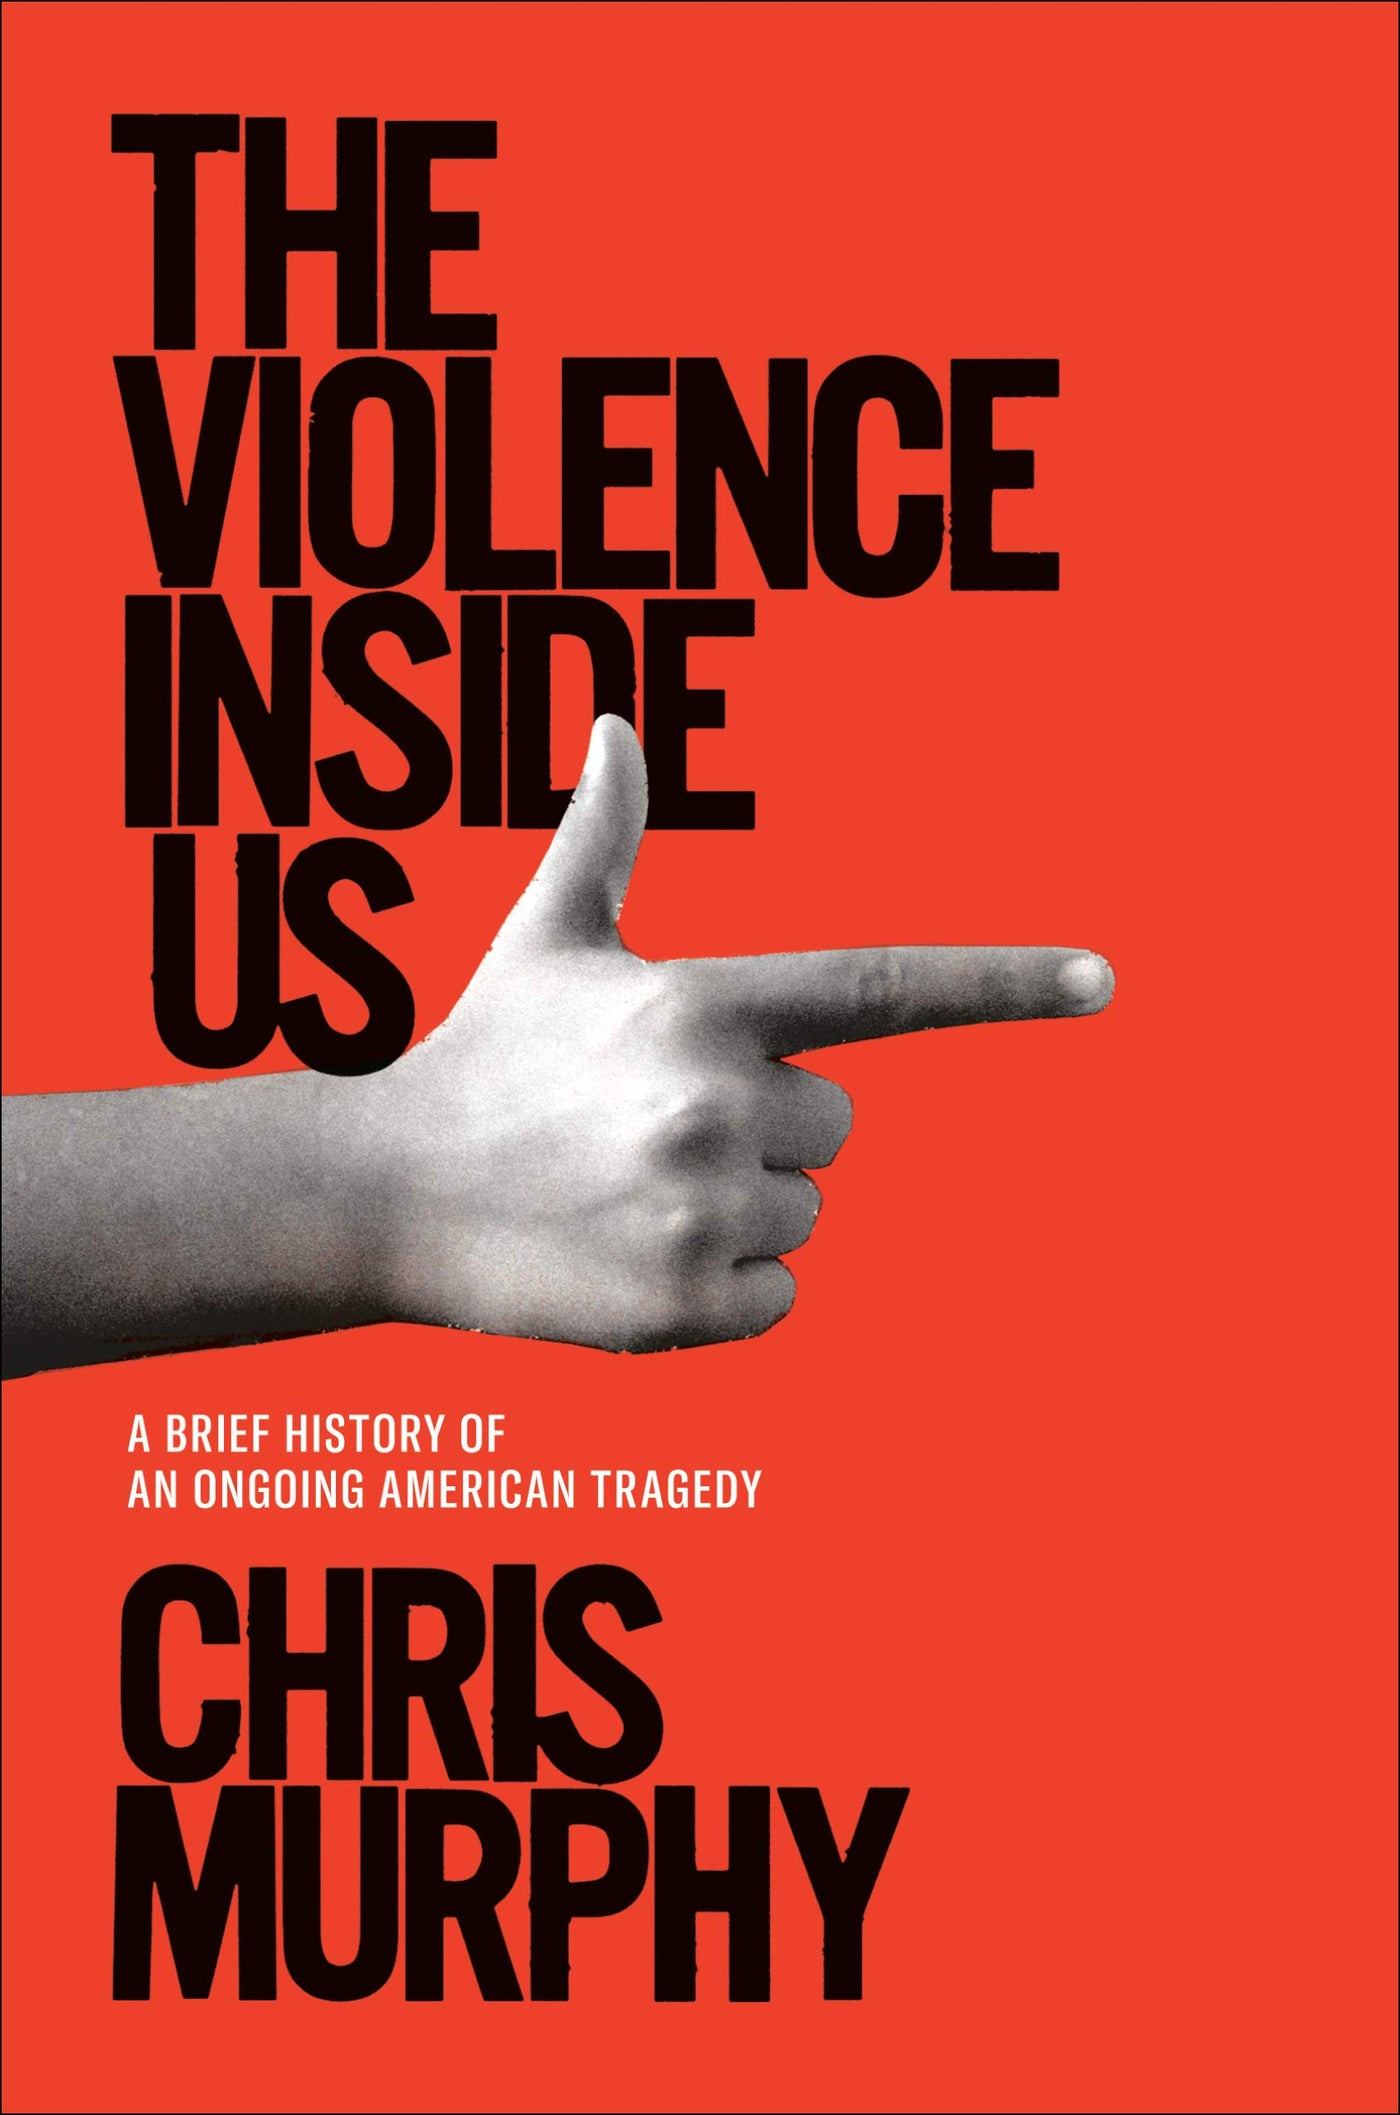 The Violence Inside Us: A Brief History Of An Ongoing American Tragedy by Chris Murphy